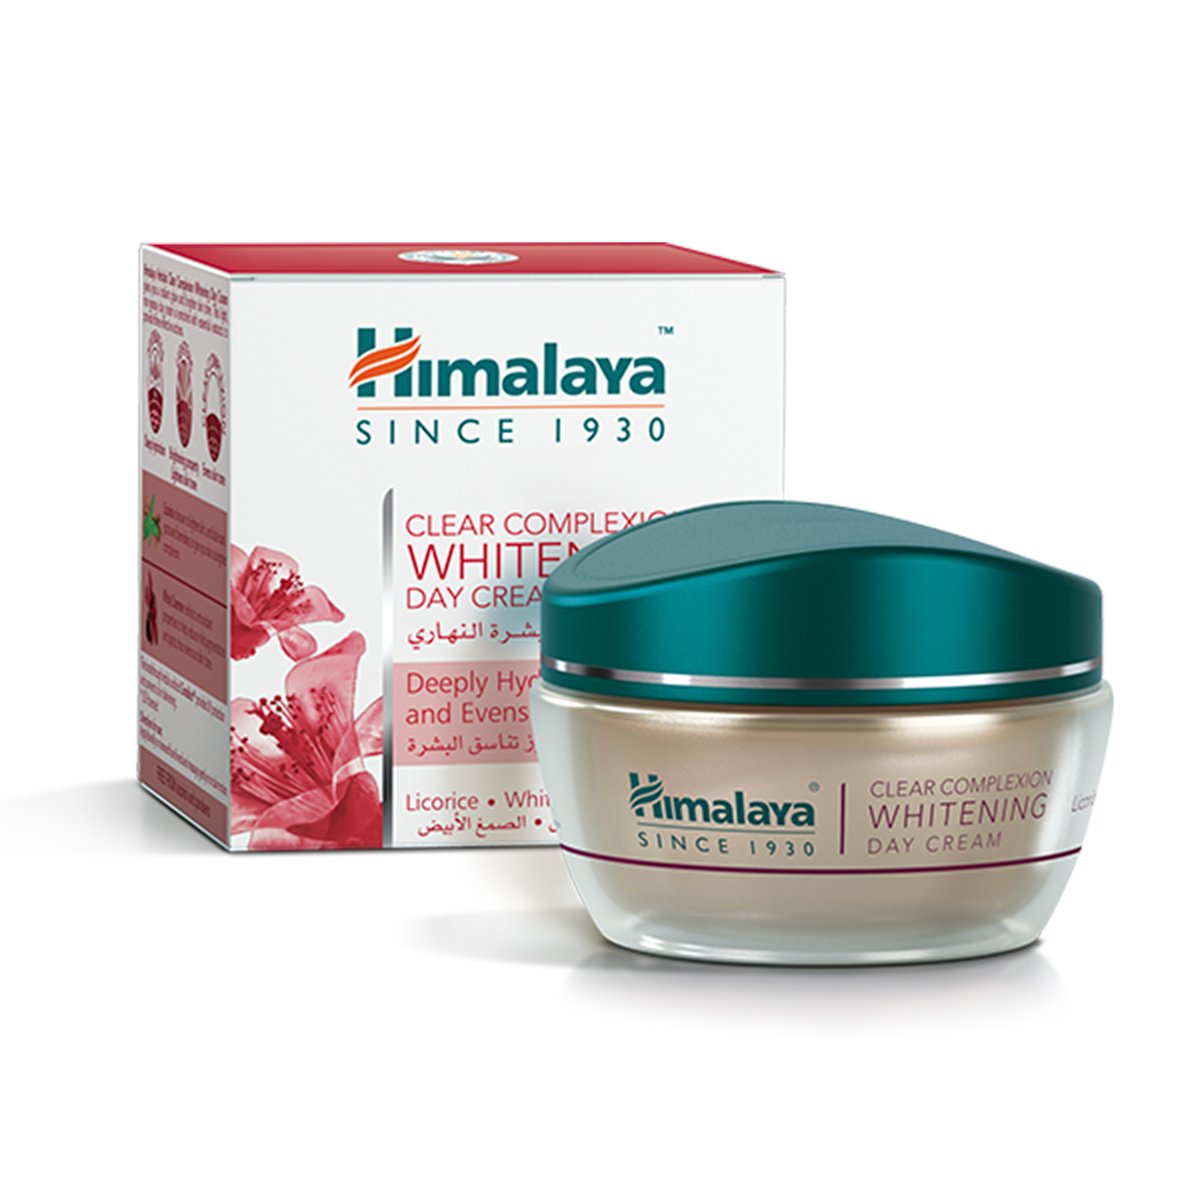 Himalaya Day Cream Clear Complexion Whitening 50 g